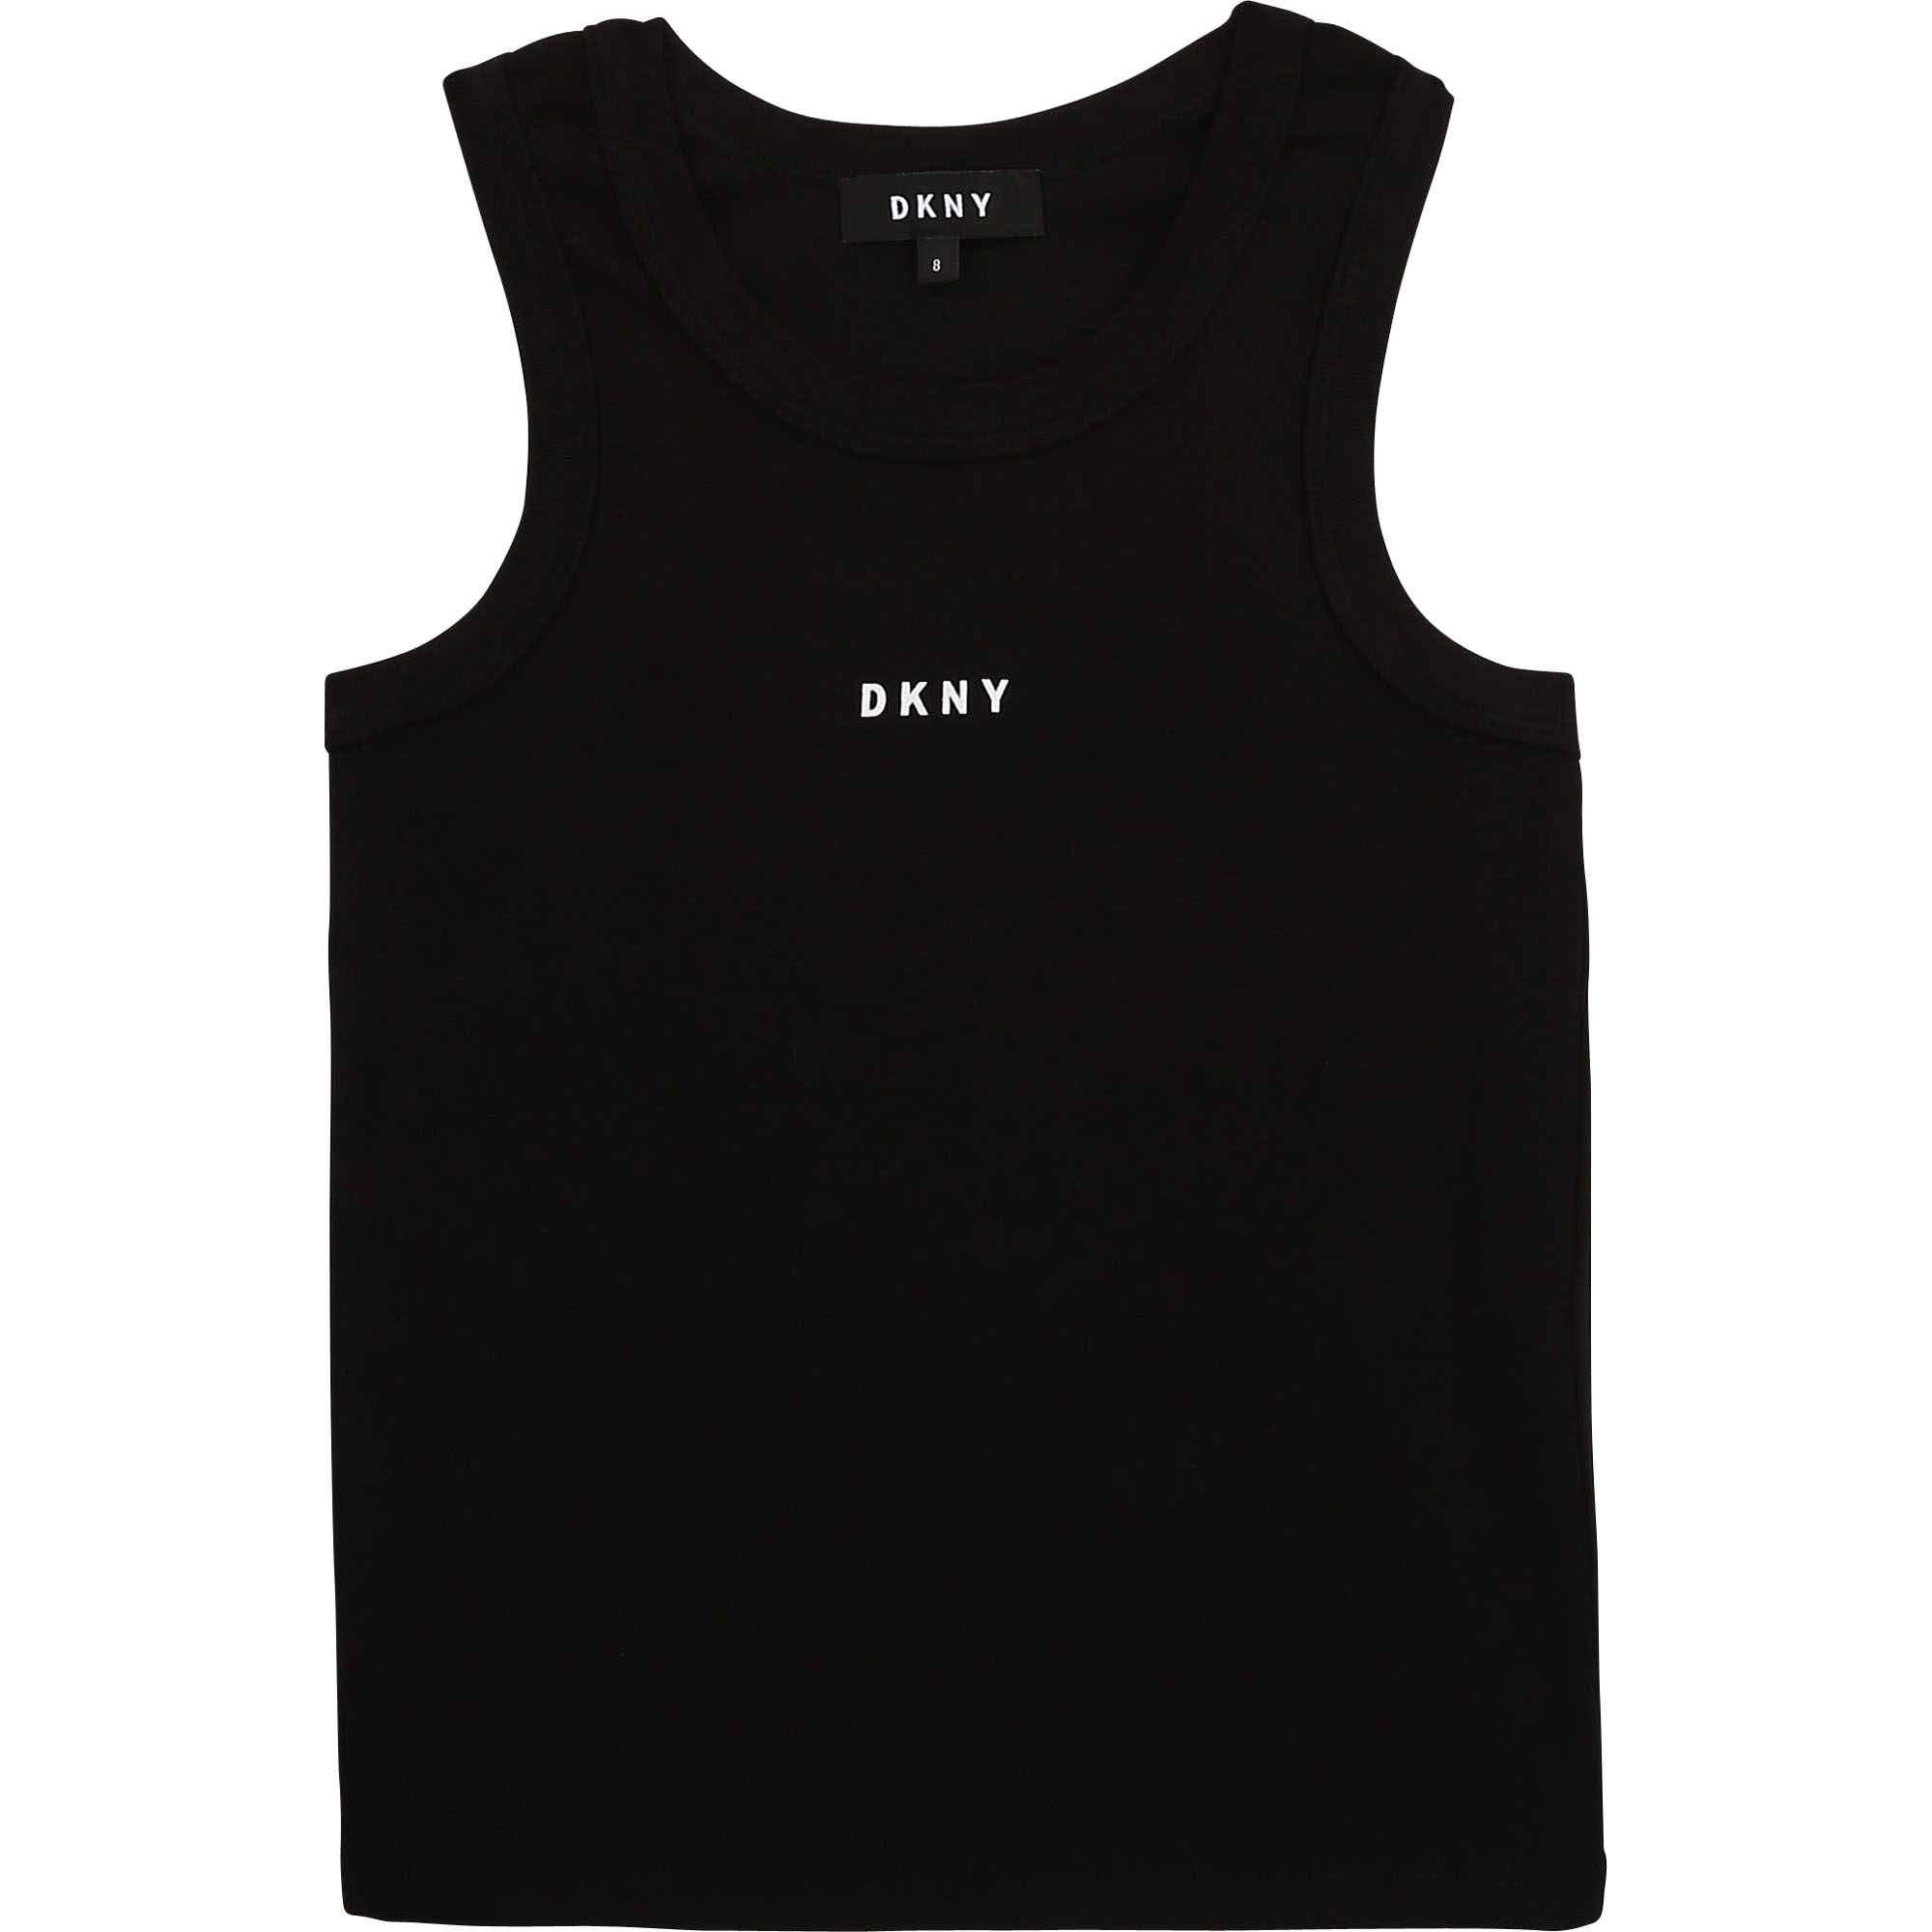 T-SHIRT+FANTAISIE BLOES DKNY Voor